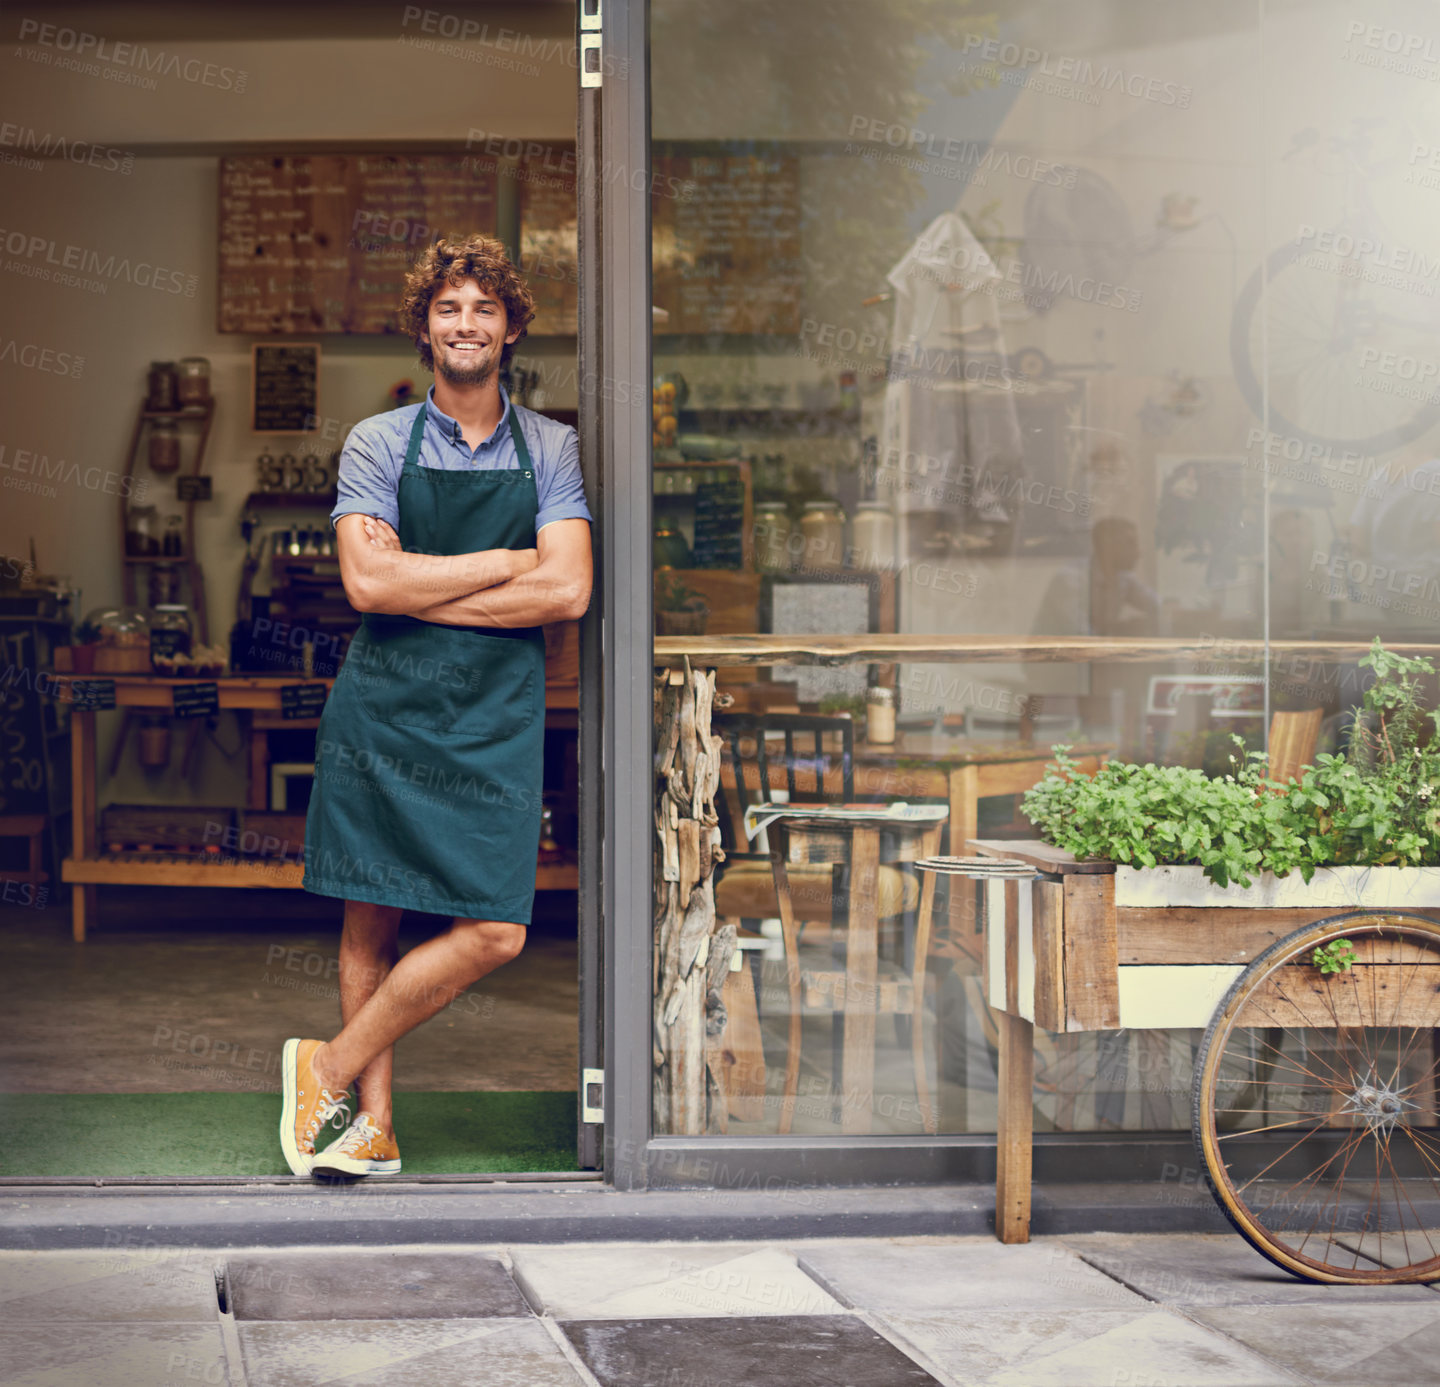 Buy stock photo Portrait of a successful young barista standing in the doorway of a coffee shop